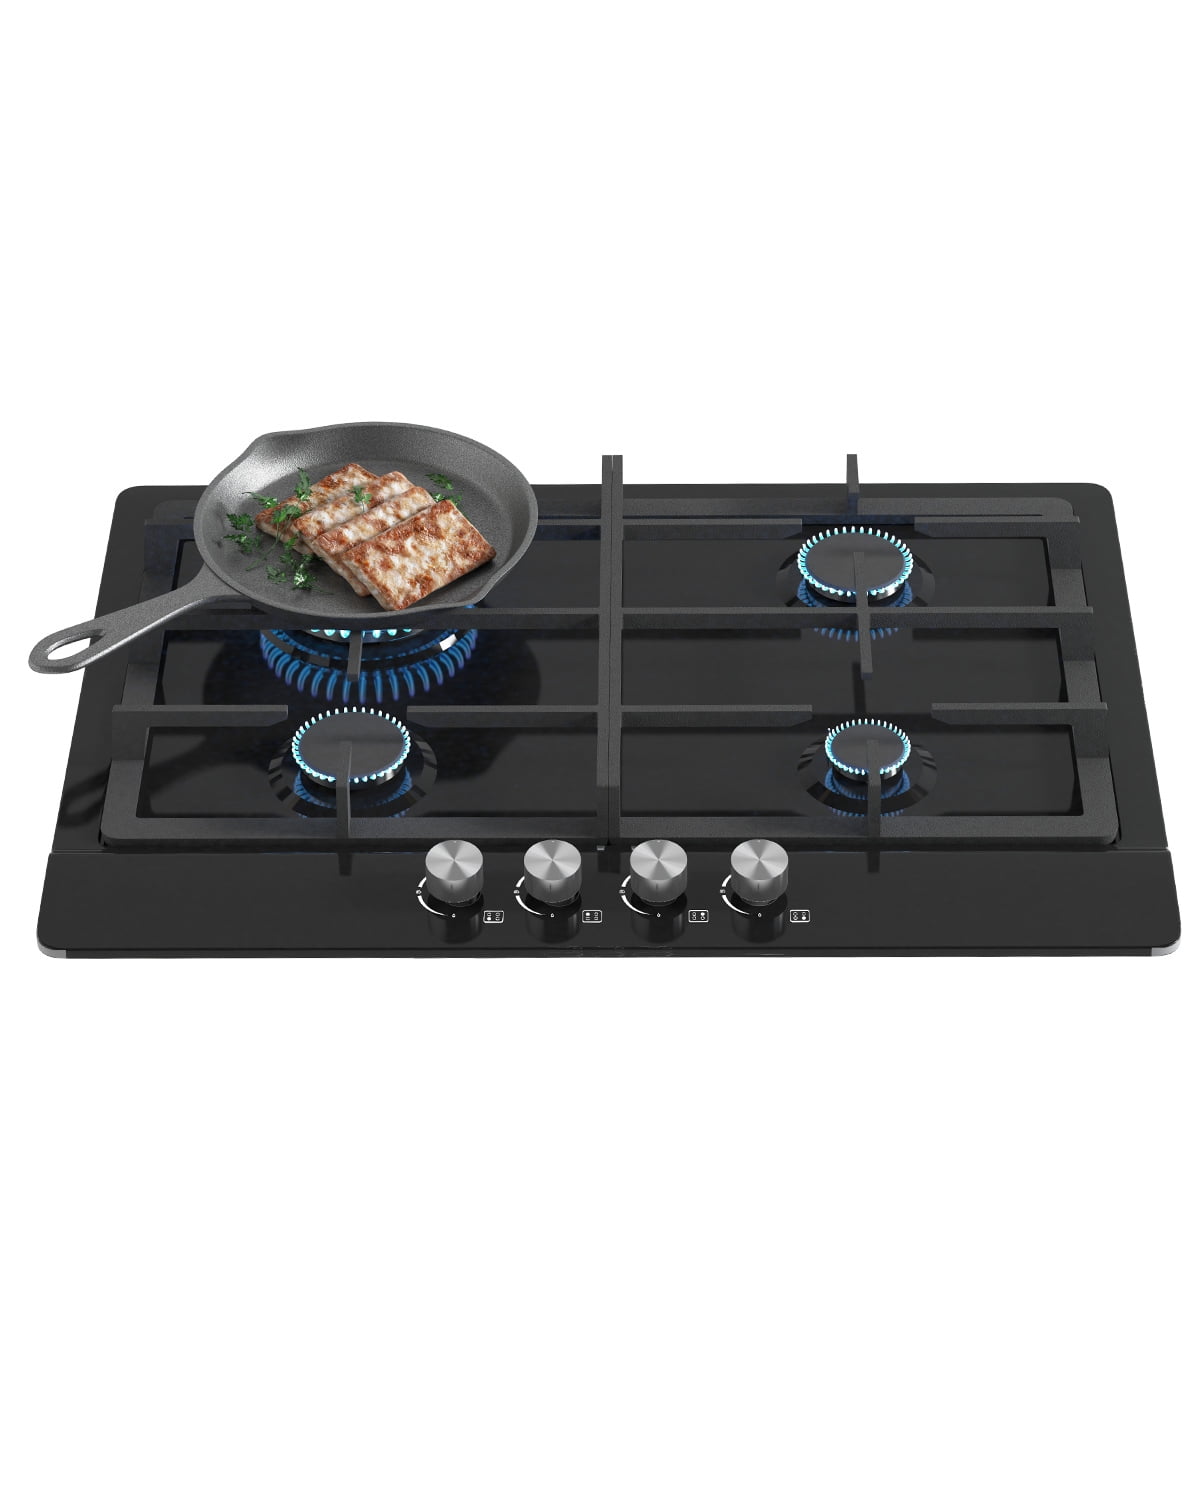 4 BURNERS TABLE TOP COOKER – Erato Gas Cooker